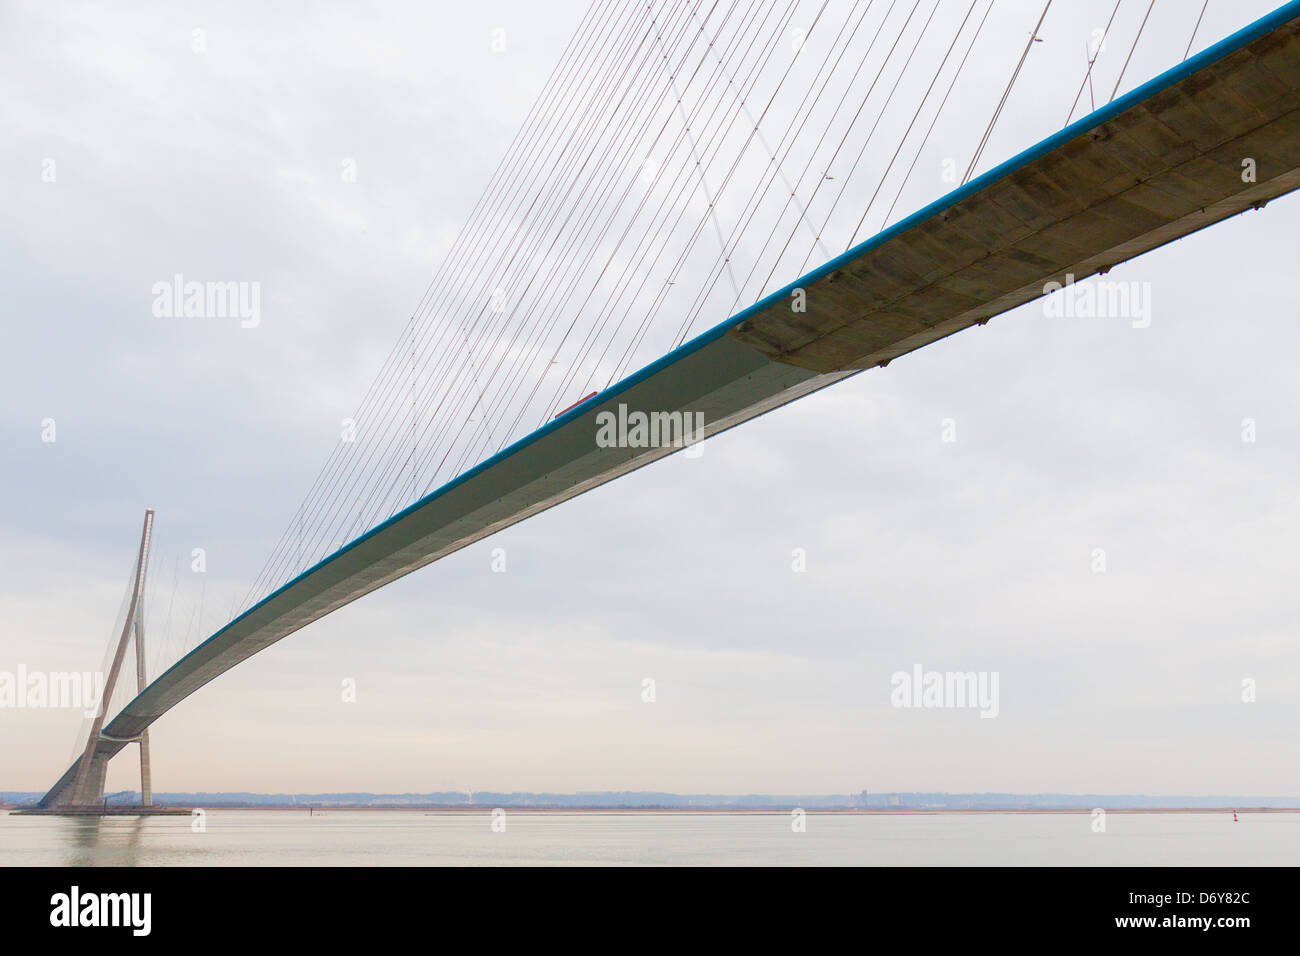 The Bridge of the Normandy (Normandie), connecting Le Havre to Honfleur Stock Photo